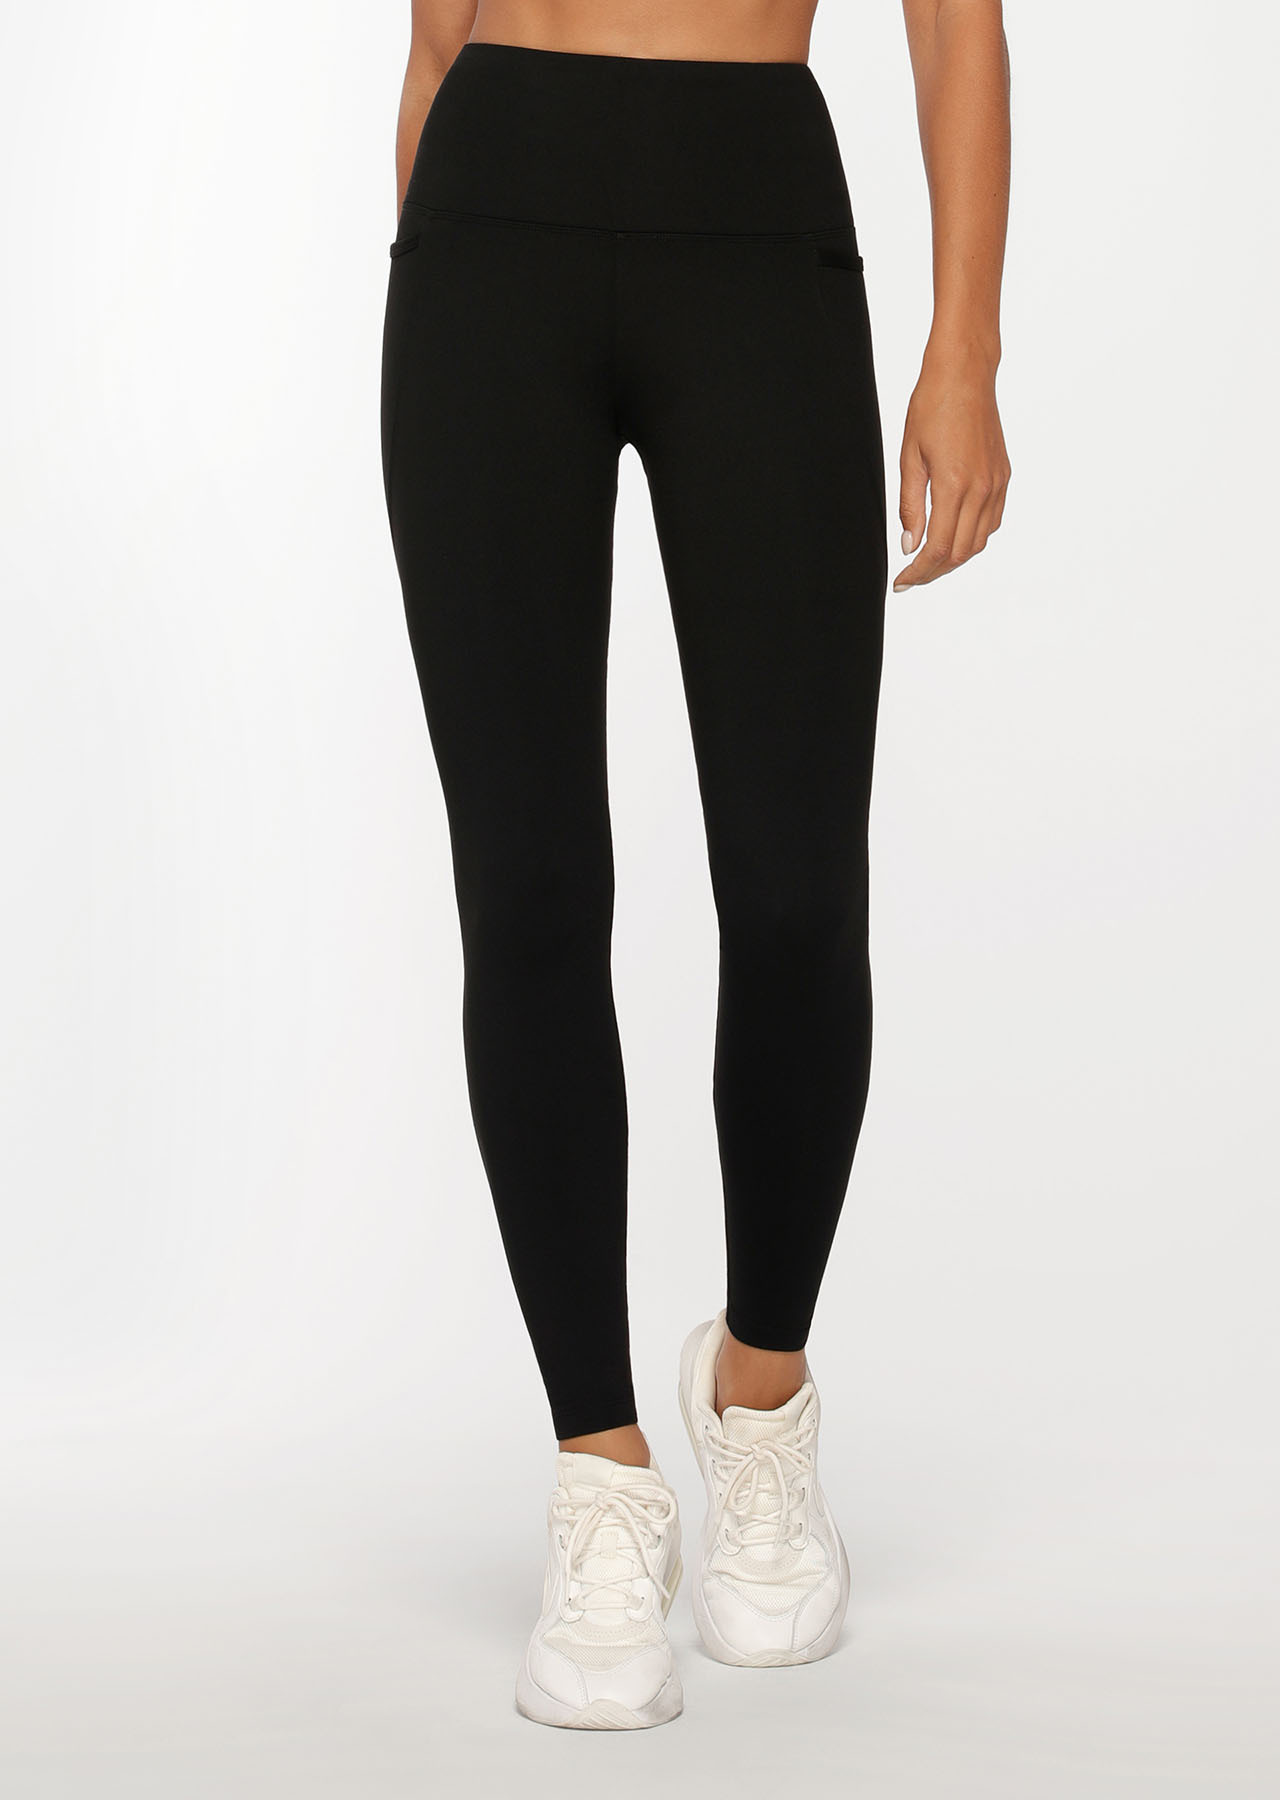 Lululemon Thermal Tights Australia  International Society of Precision  Agriculture